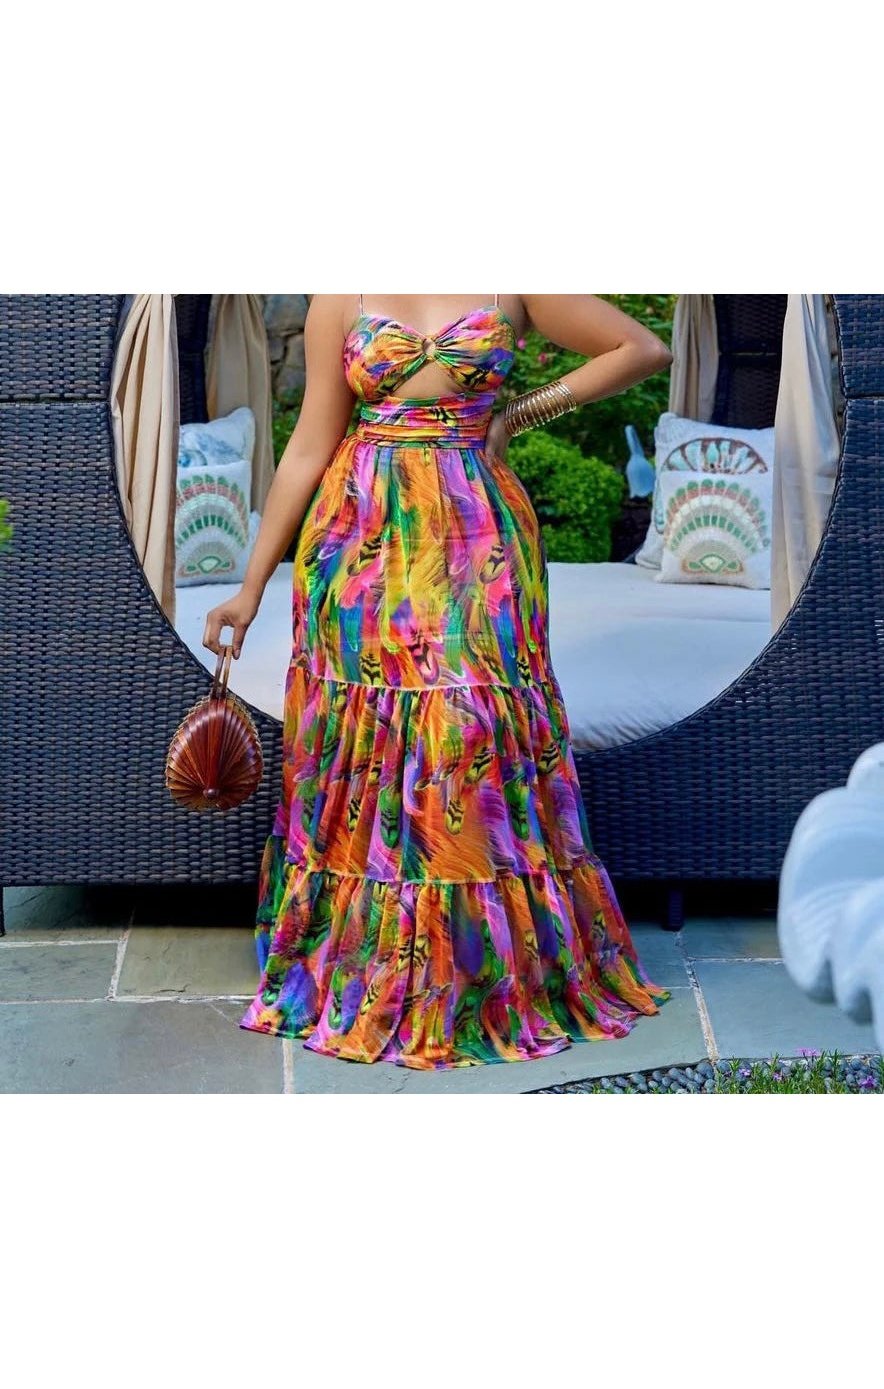 Flowy Multicolored Maxi Dress (2 Colors) (Many Sizes)